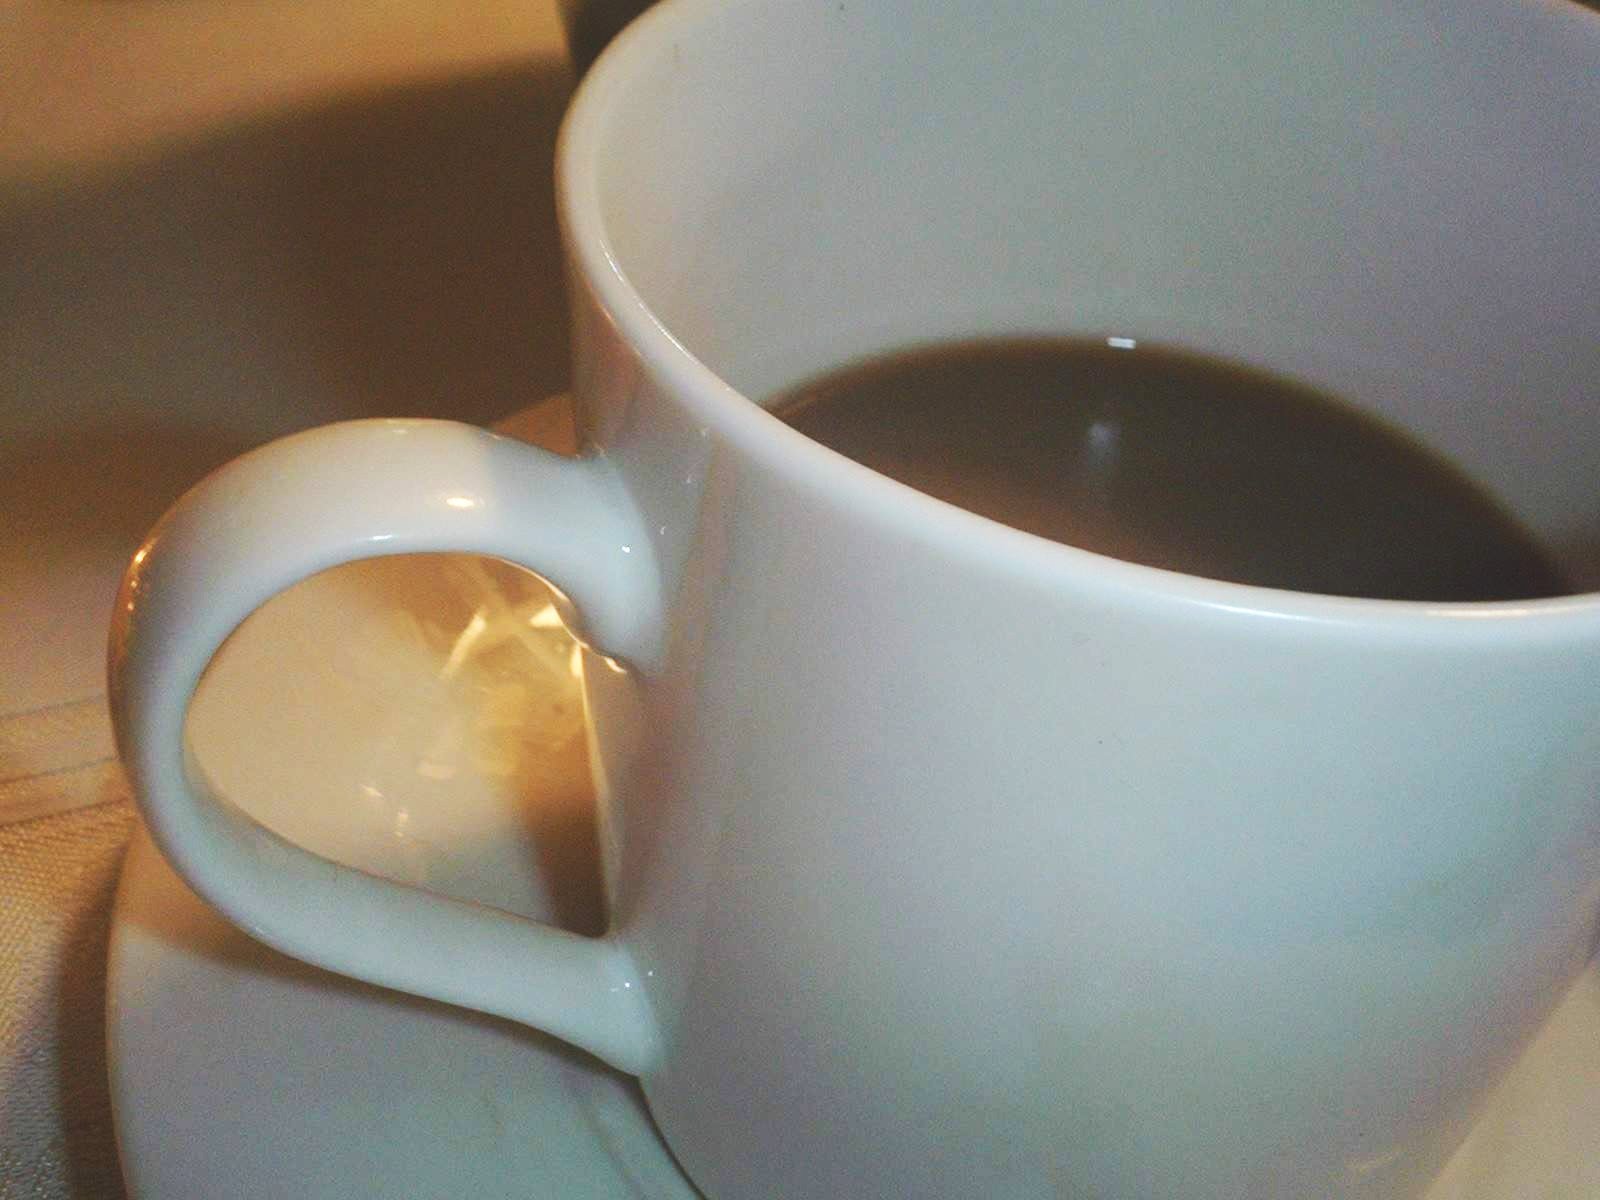 a close up of a cup of coffee on a saucer